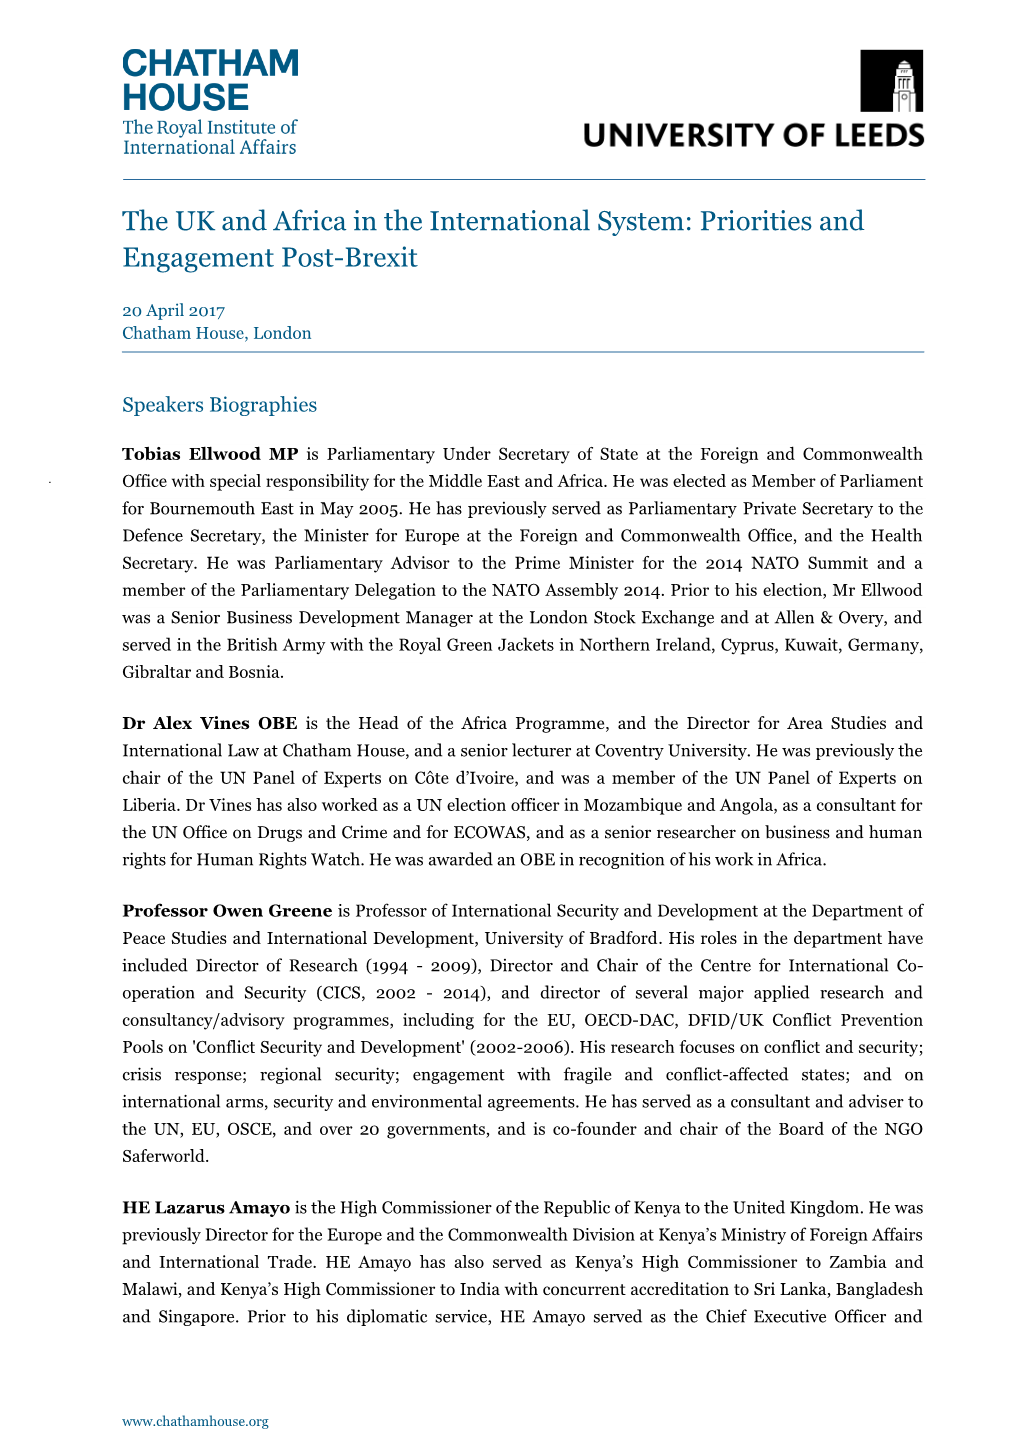 The UK and Africa in the International System: Priorities and Engagement Post-Brexit